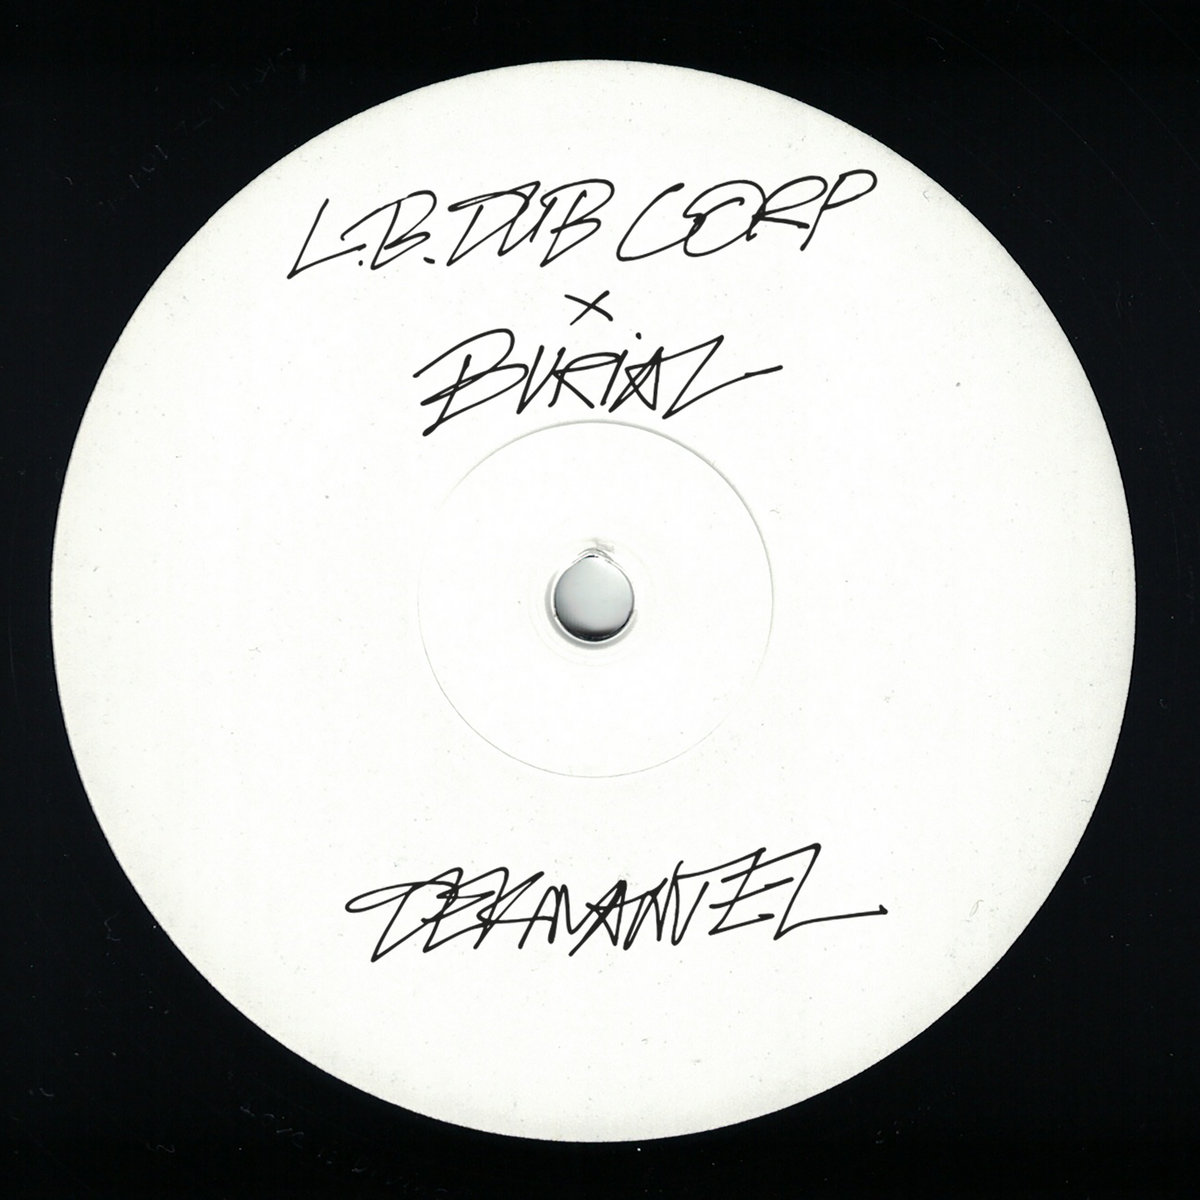 ‘Only the Good Times’, L.B. Dub Corp’s emotive first single on #DekmantelRecords, is out today! As if that’s not enough, the digital and limited-edition vinyl track comes with a surprise remix by the one and only Burial. dekmantel.com/shop/records/l…